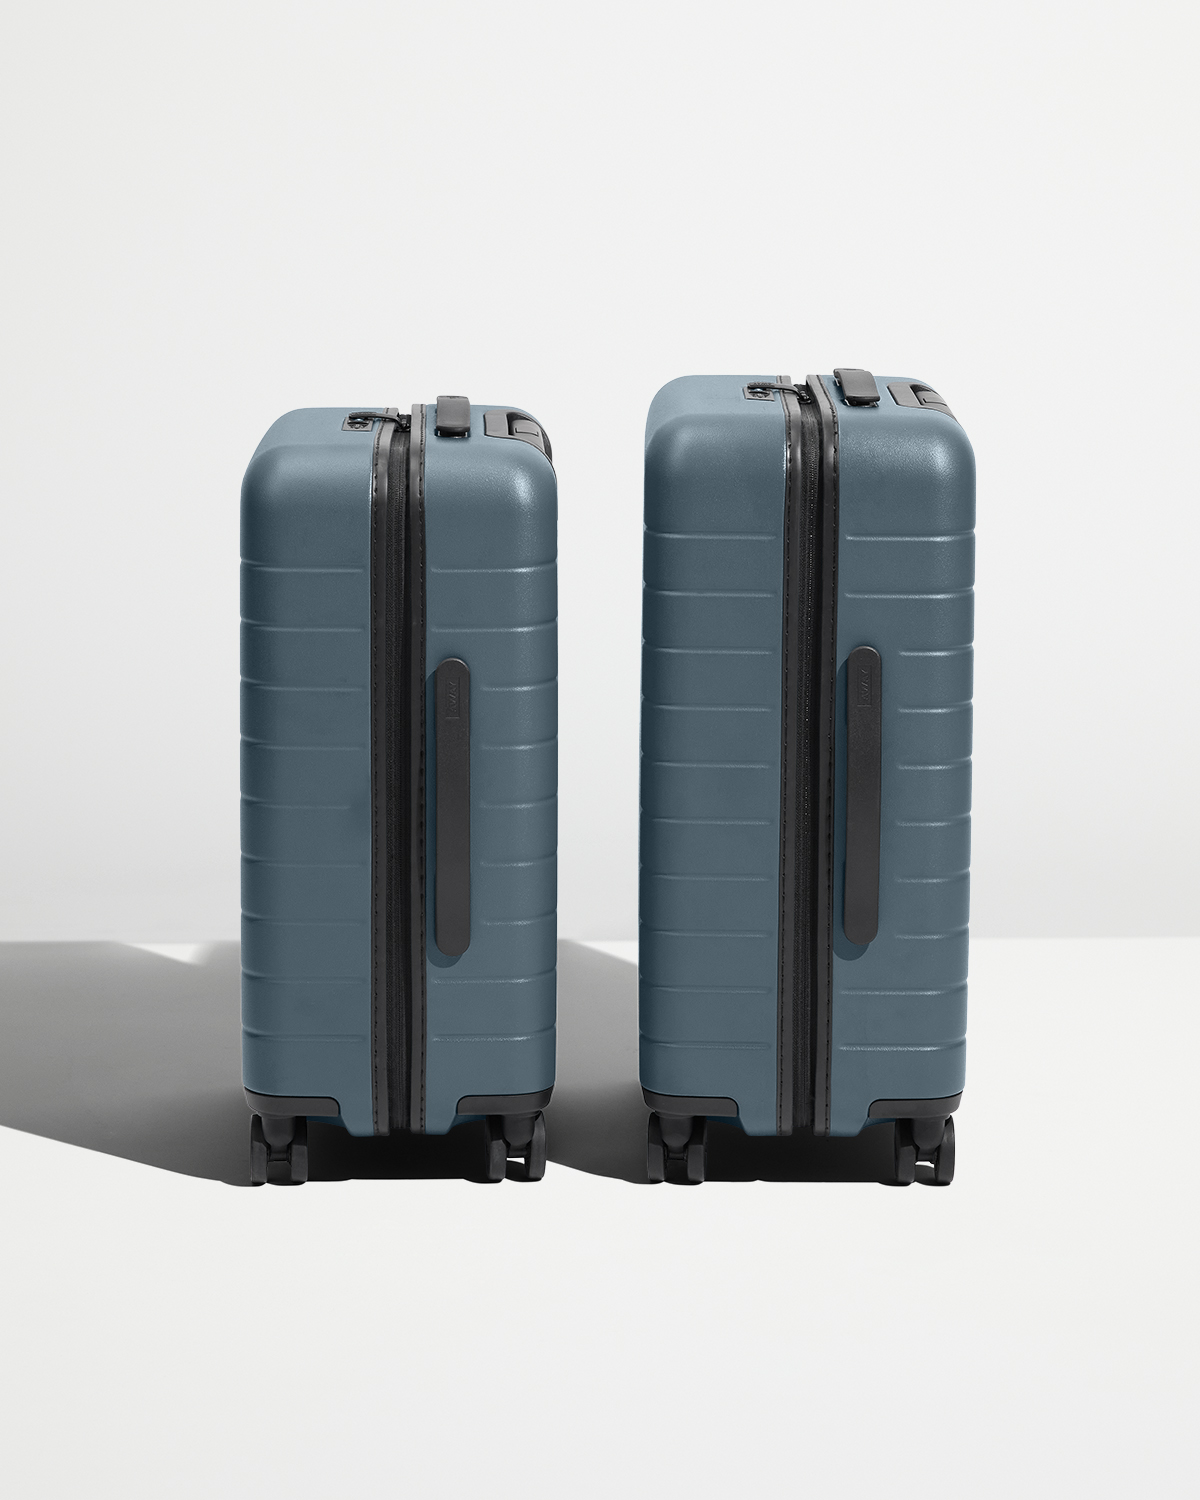 The 12 Best Luggage Covers of 2023